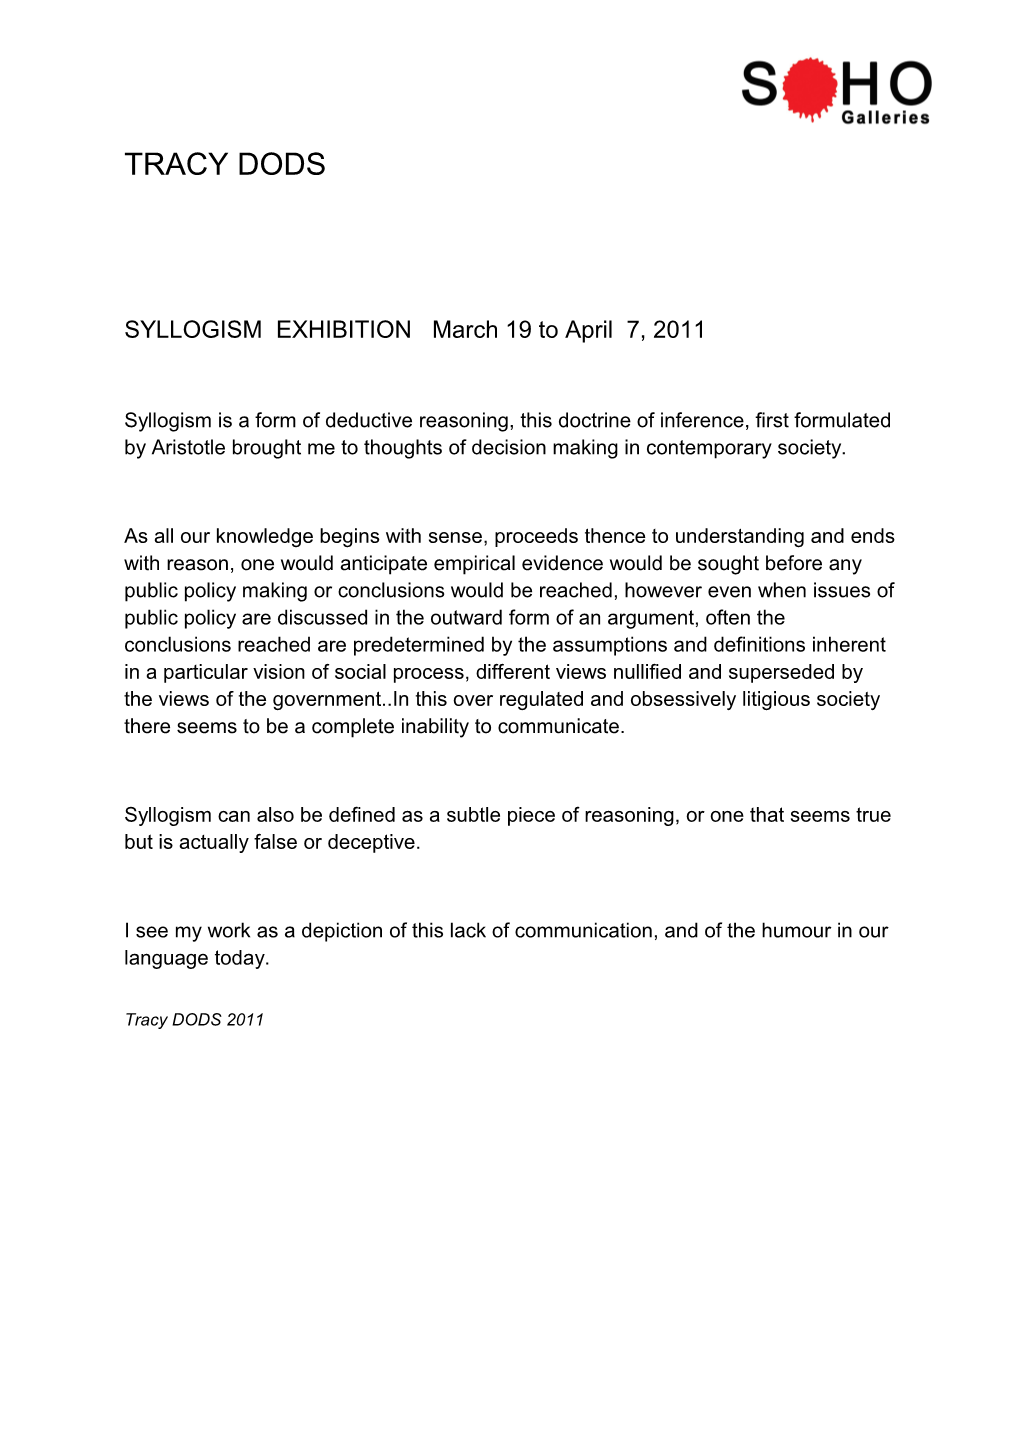 SYLLOGISM EXHIBITION March 19 to April 7, 2011